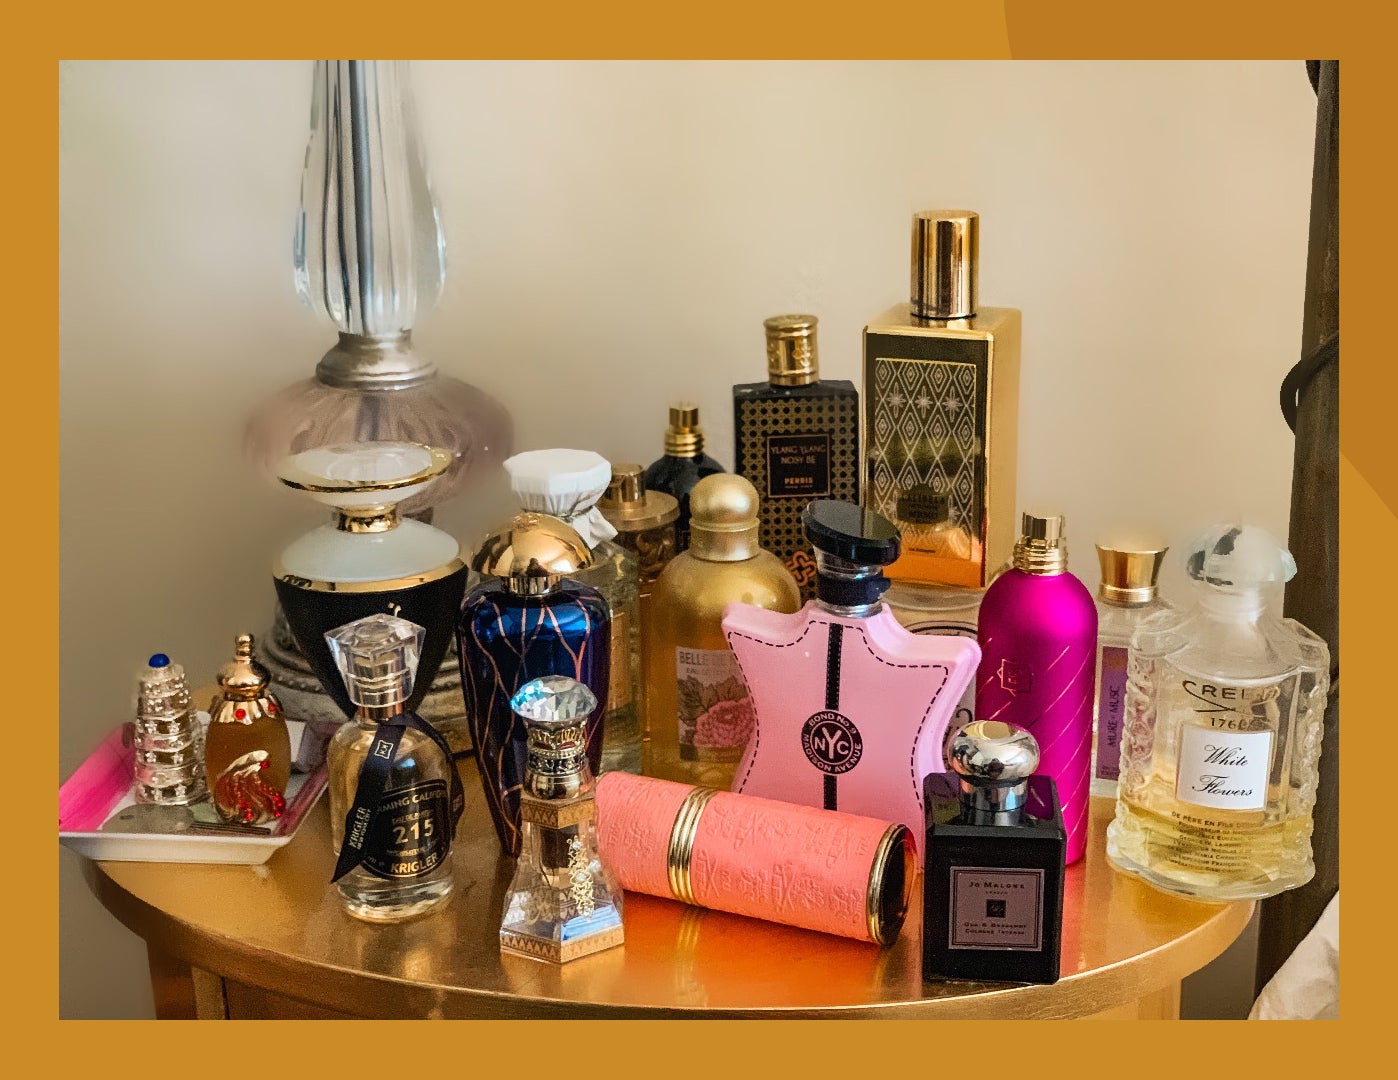 The Psychology Of Wearing Perfume At Home In Quarantine